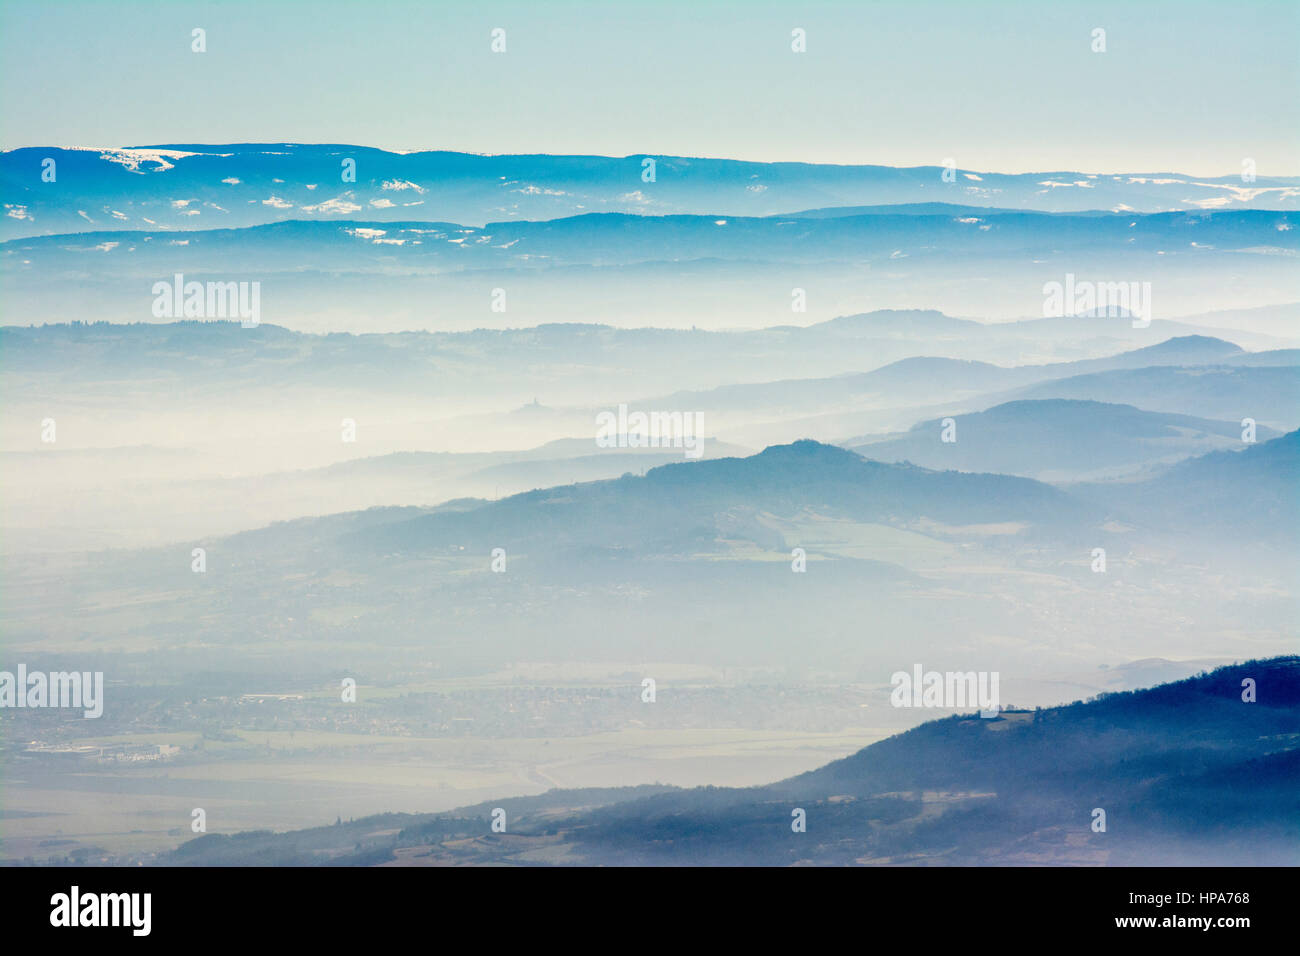 Mist in mountain valleys at dawn Stock Photo